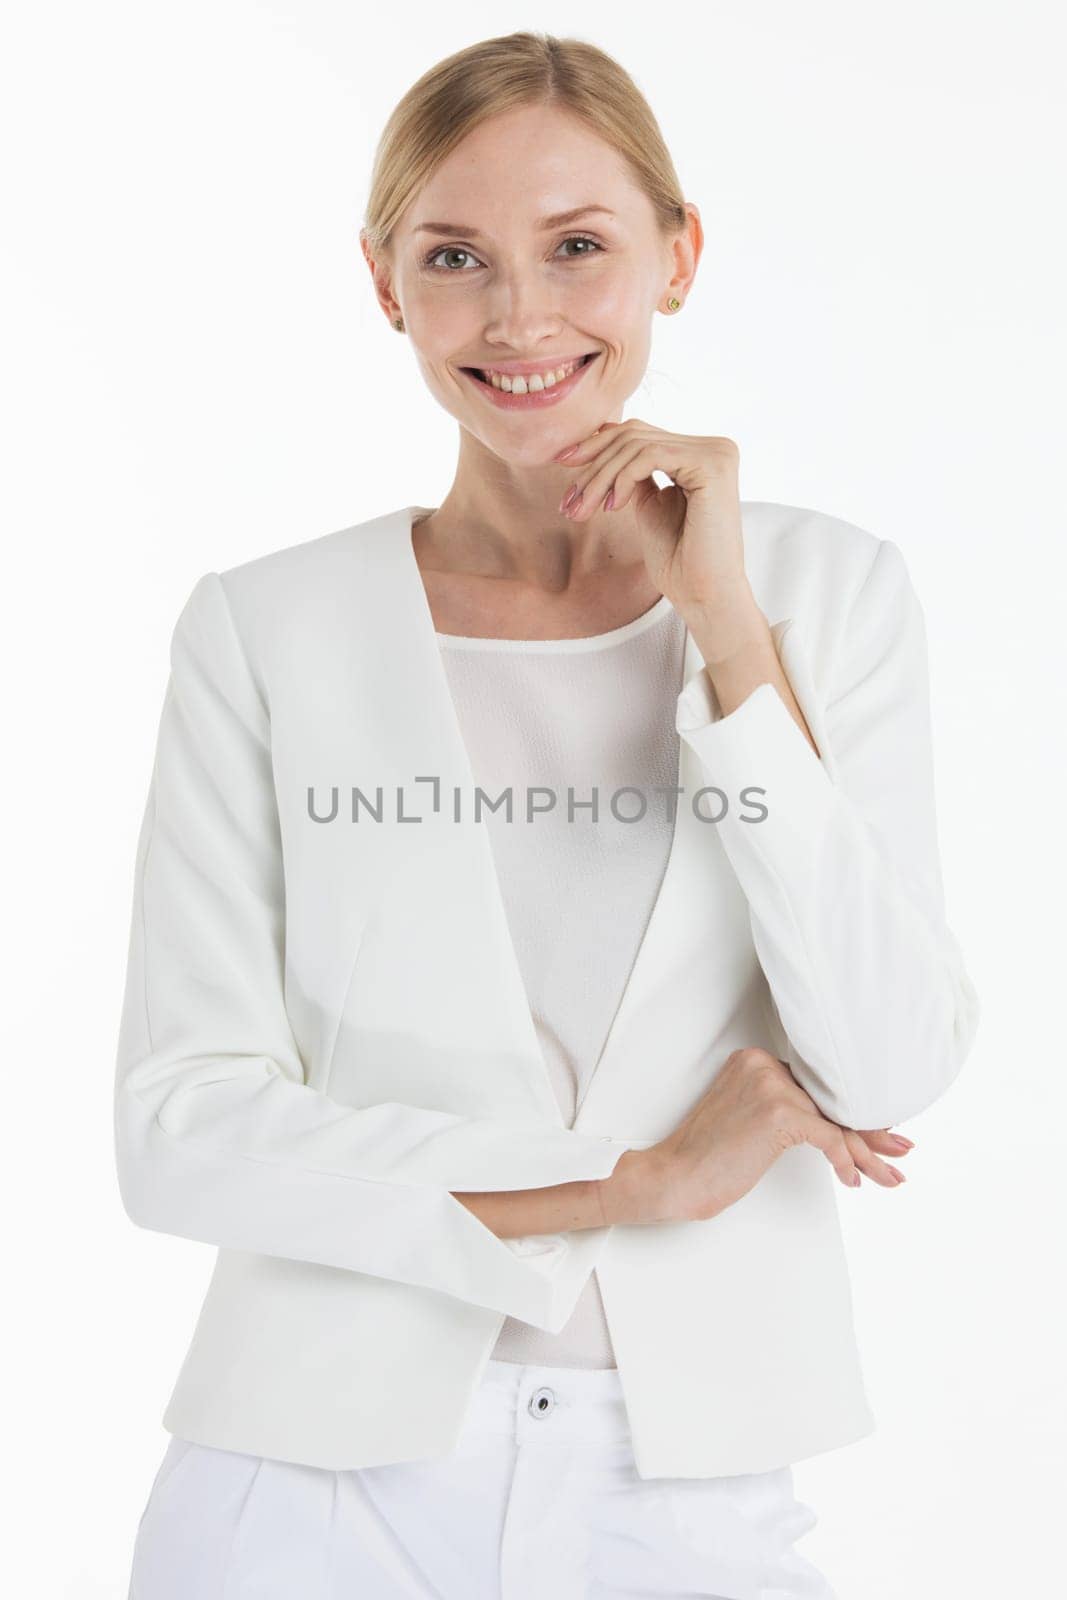 Portrait of business woman smiling by Yellowj